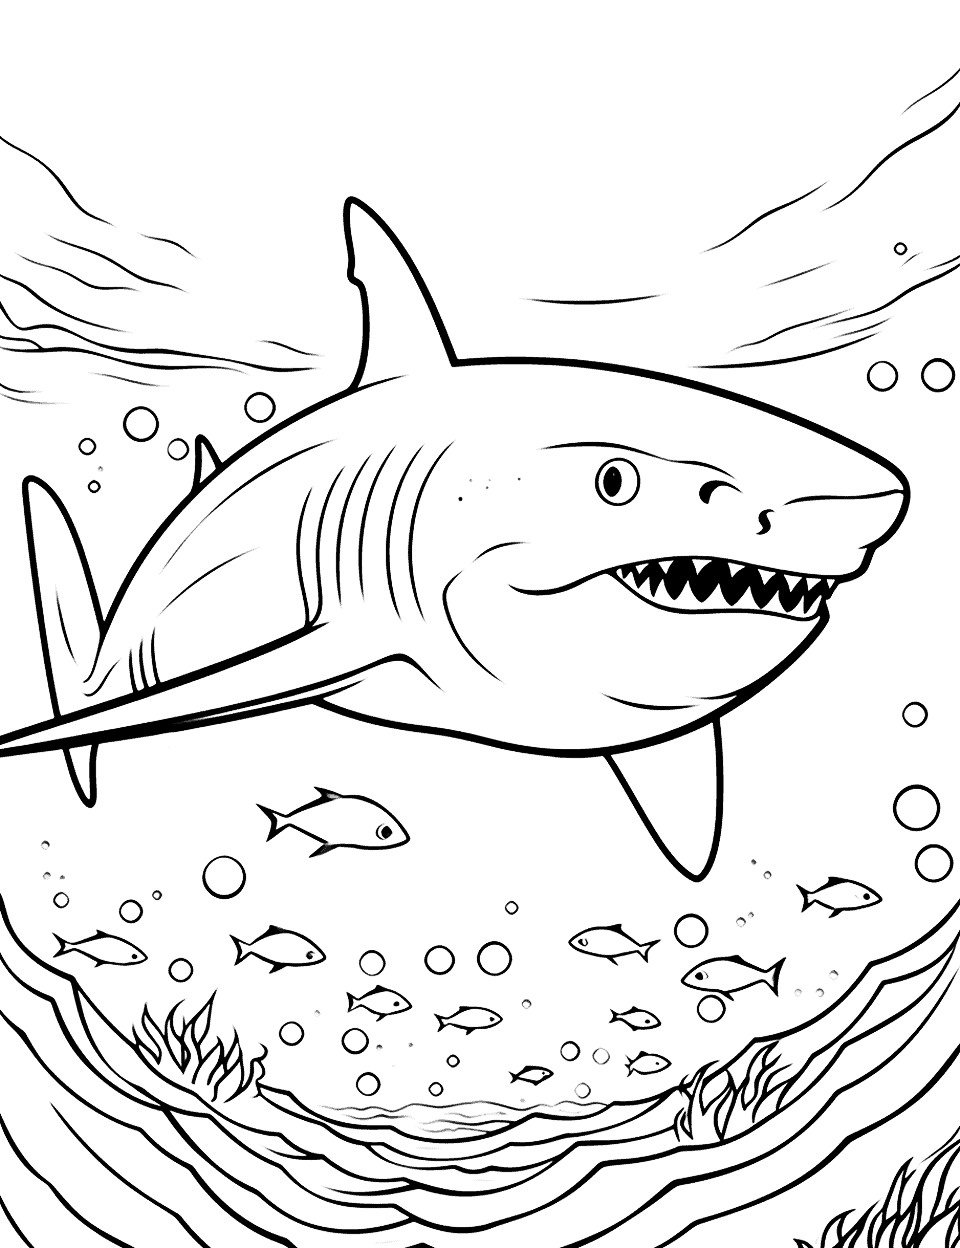 Tiger Shark in the Sea Coloring Page - An intimidating tiger shark roaming the depths of the ocean, with smaller fish swimming around it.